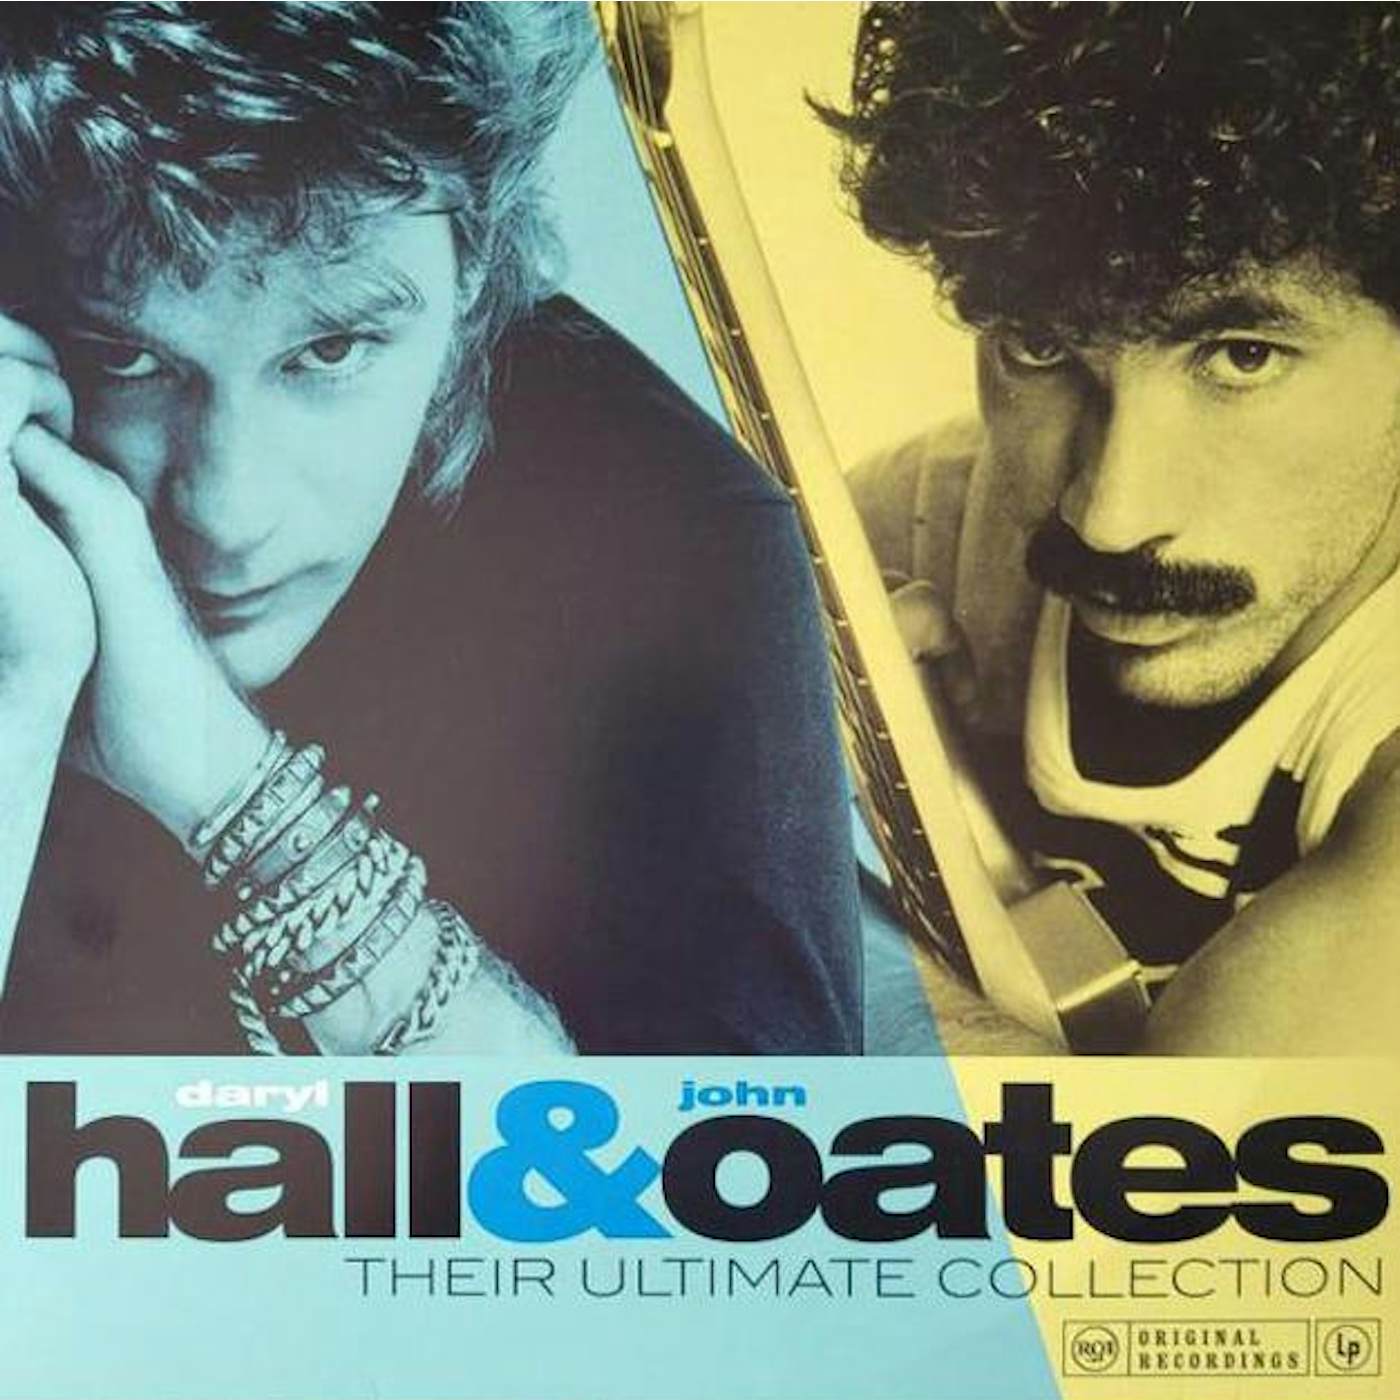 Daryl Hall & John Oates Their Ultimate Collection (140g) Vinyl 